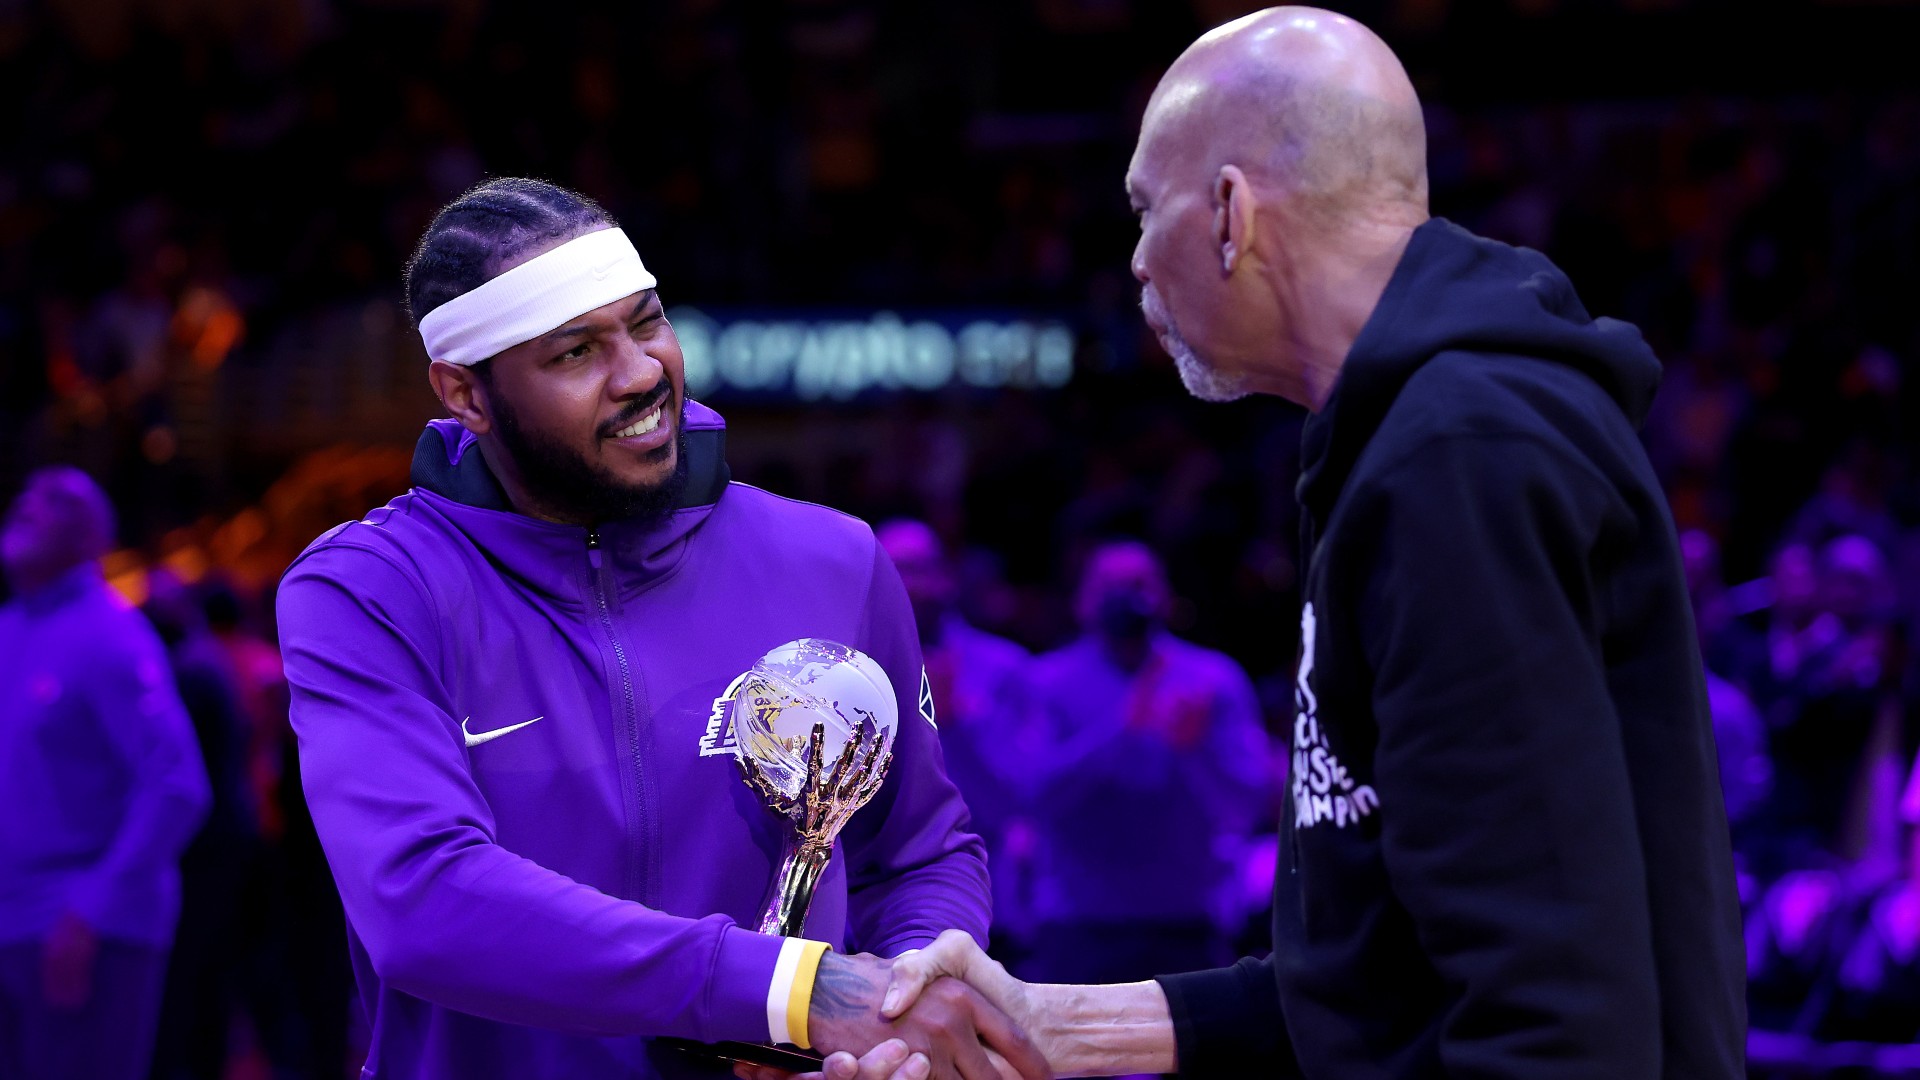 Kareem Abdul-Jabbar says he has 'time' to discuss issues with LeBron James